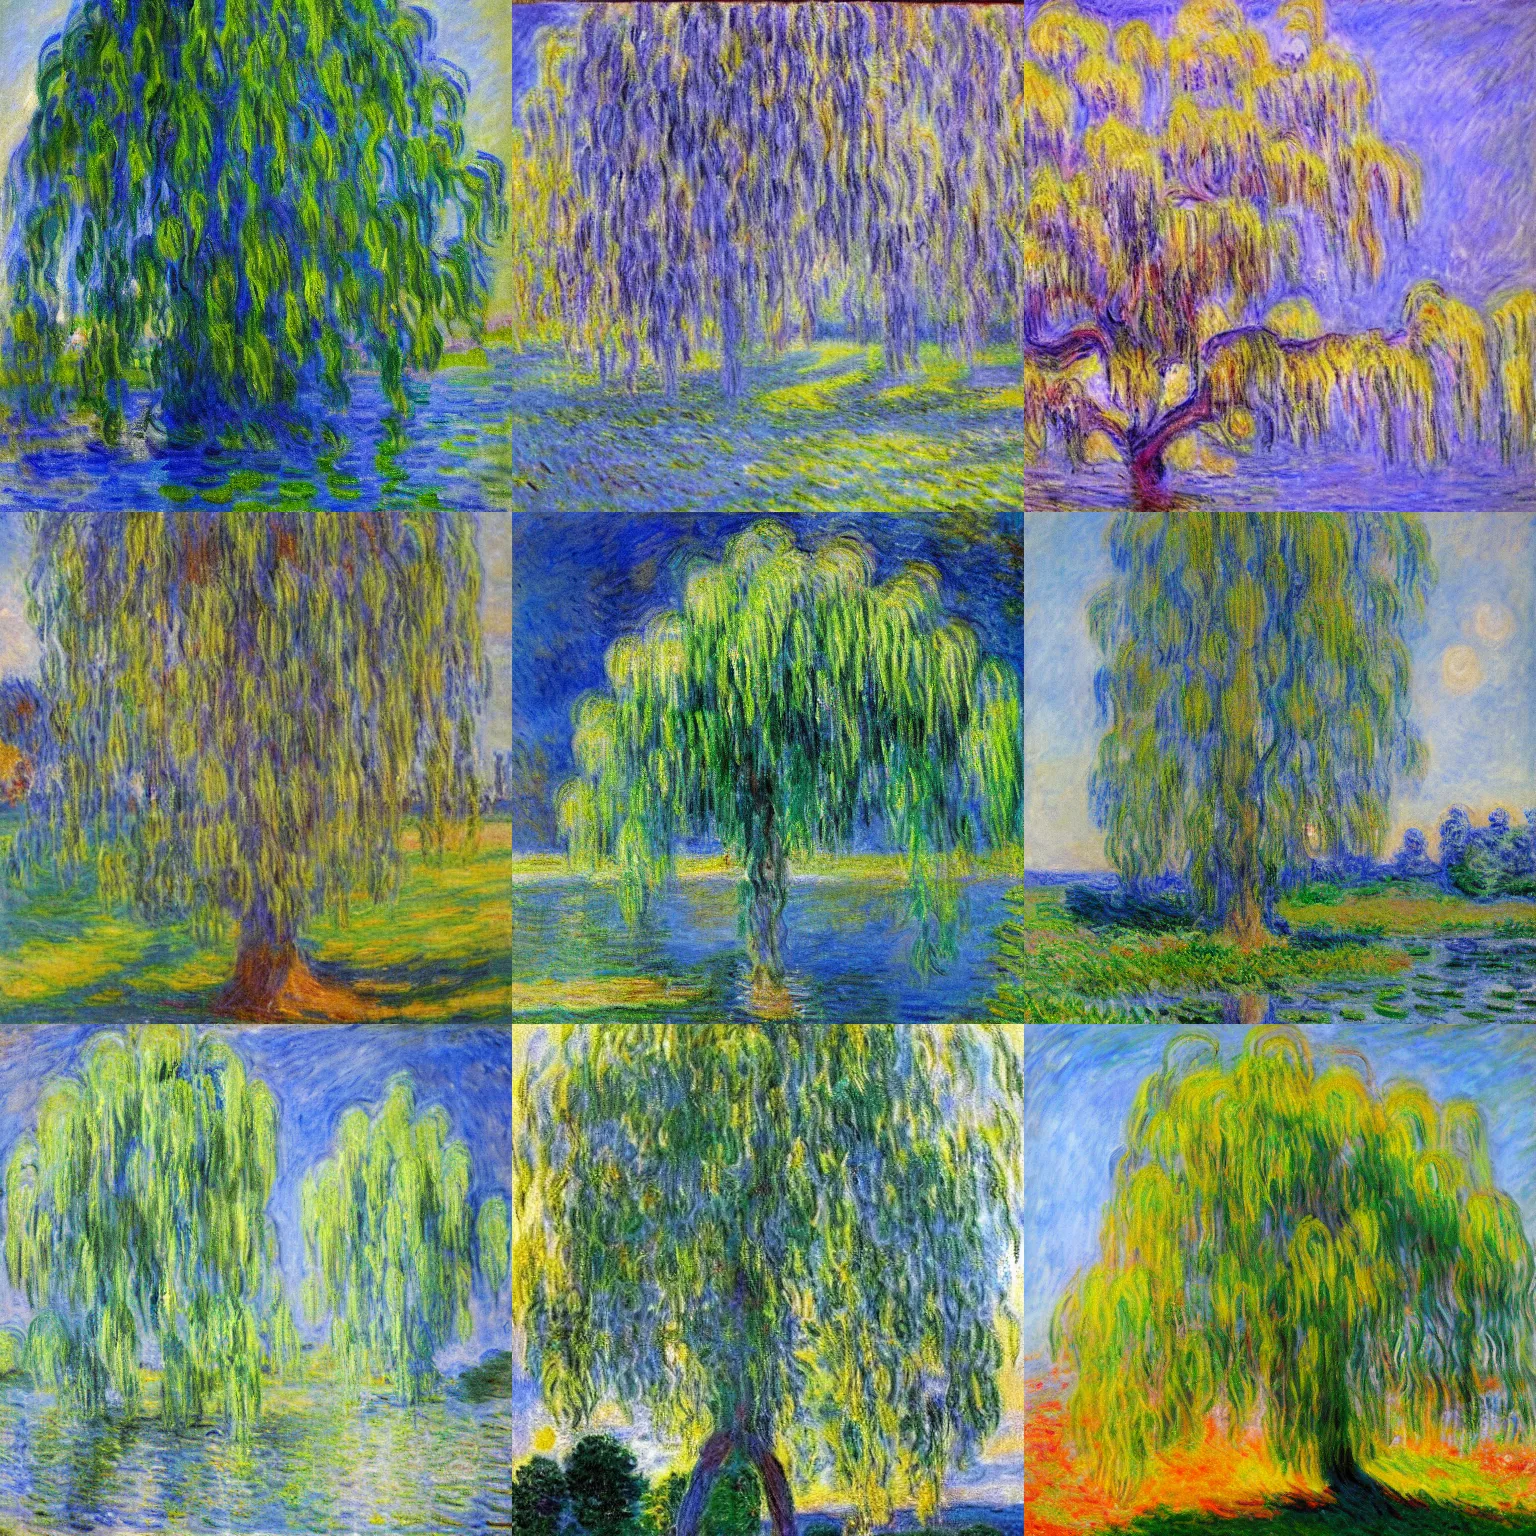 Prompt: Willow tree artwork by Monet